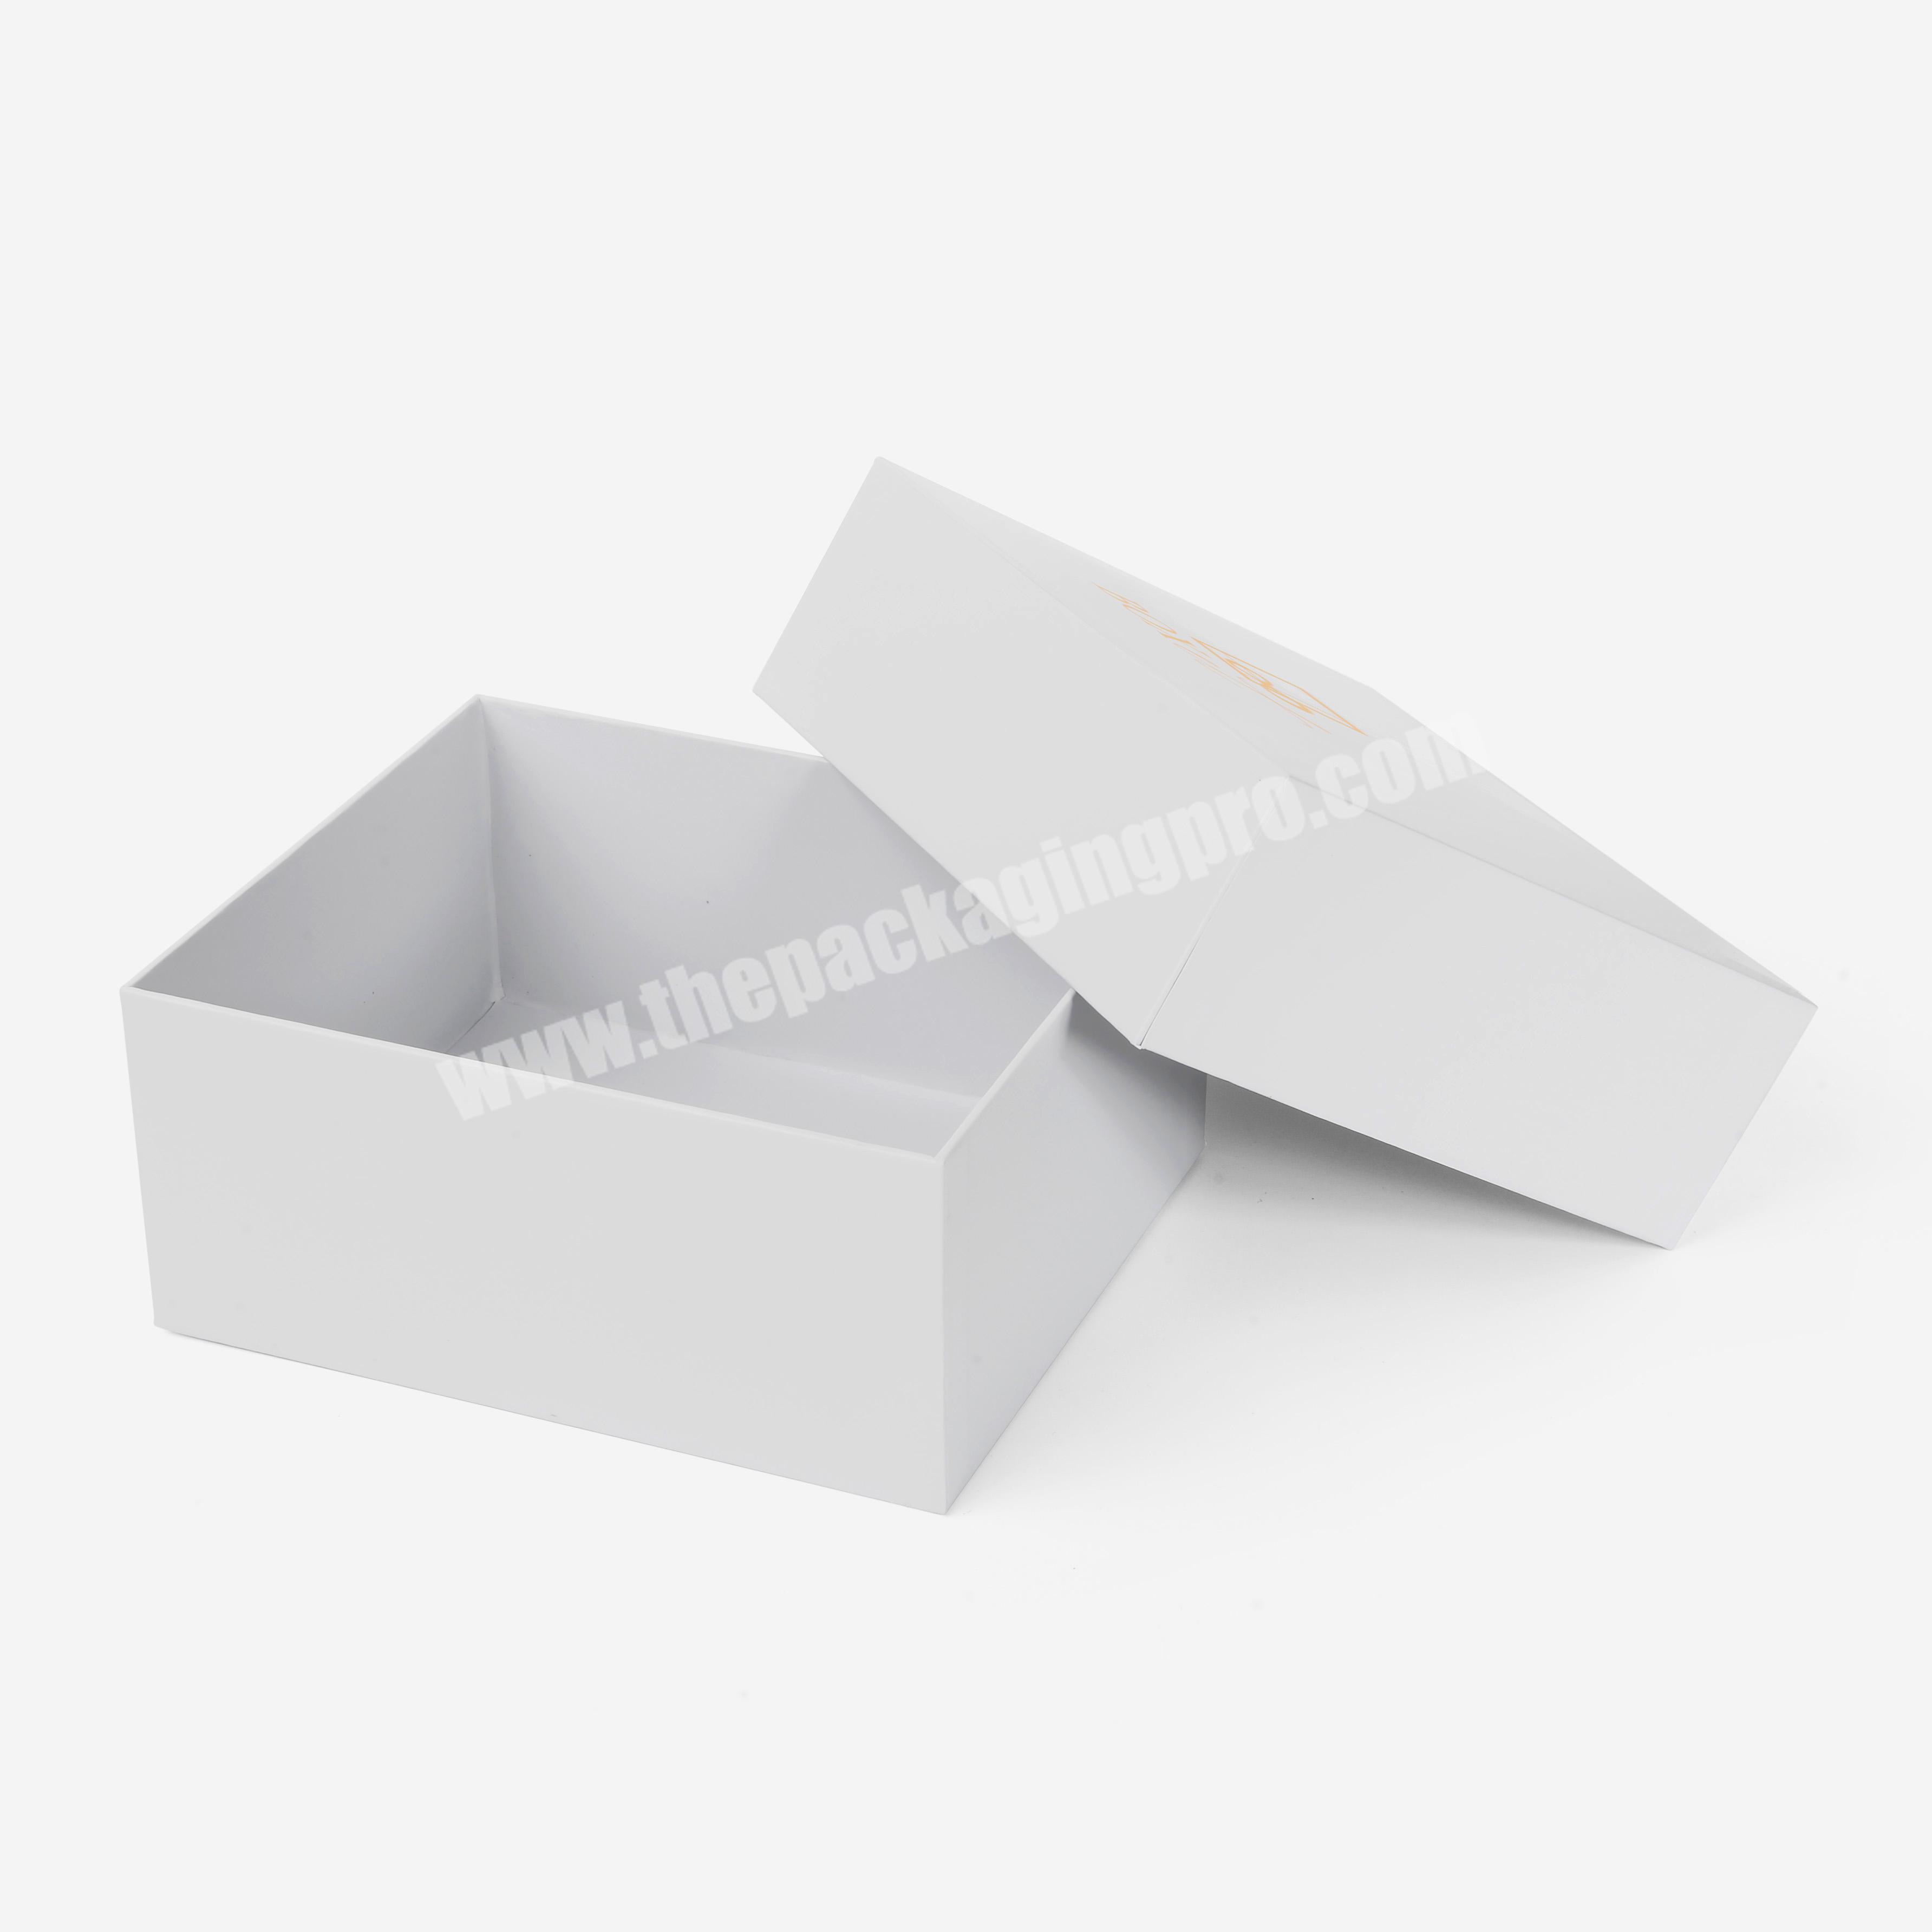 Design Packaging Luxury Texture Paper Scarves Clothing Gift Bags